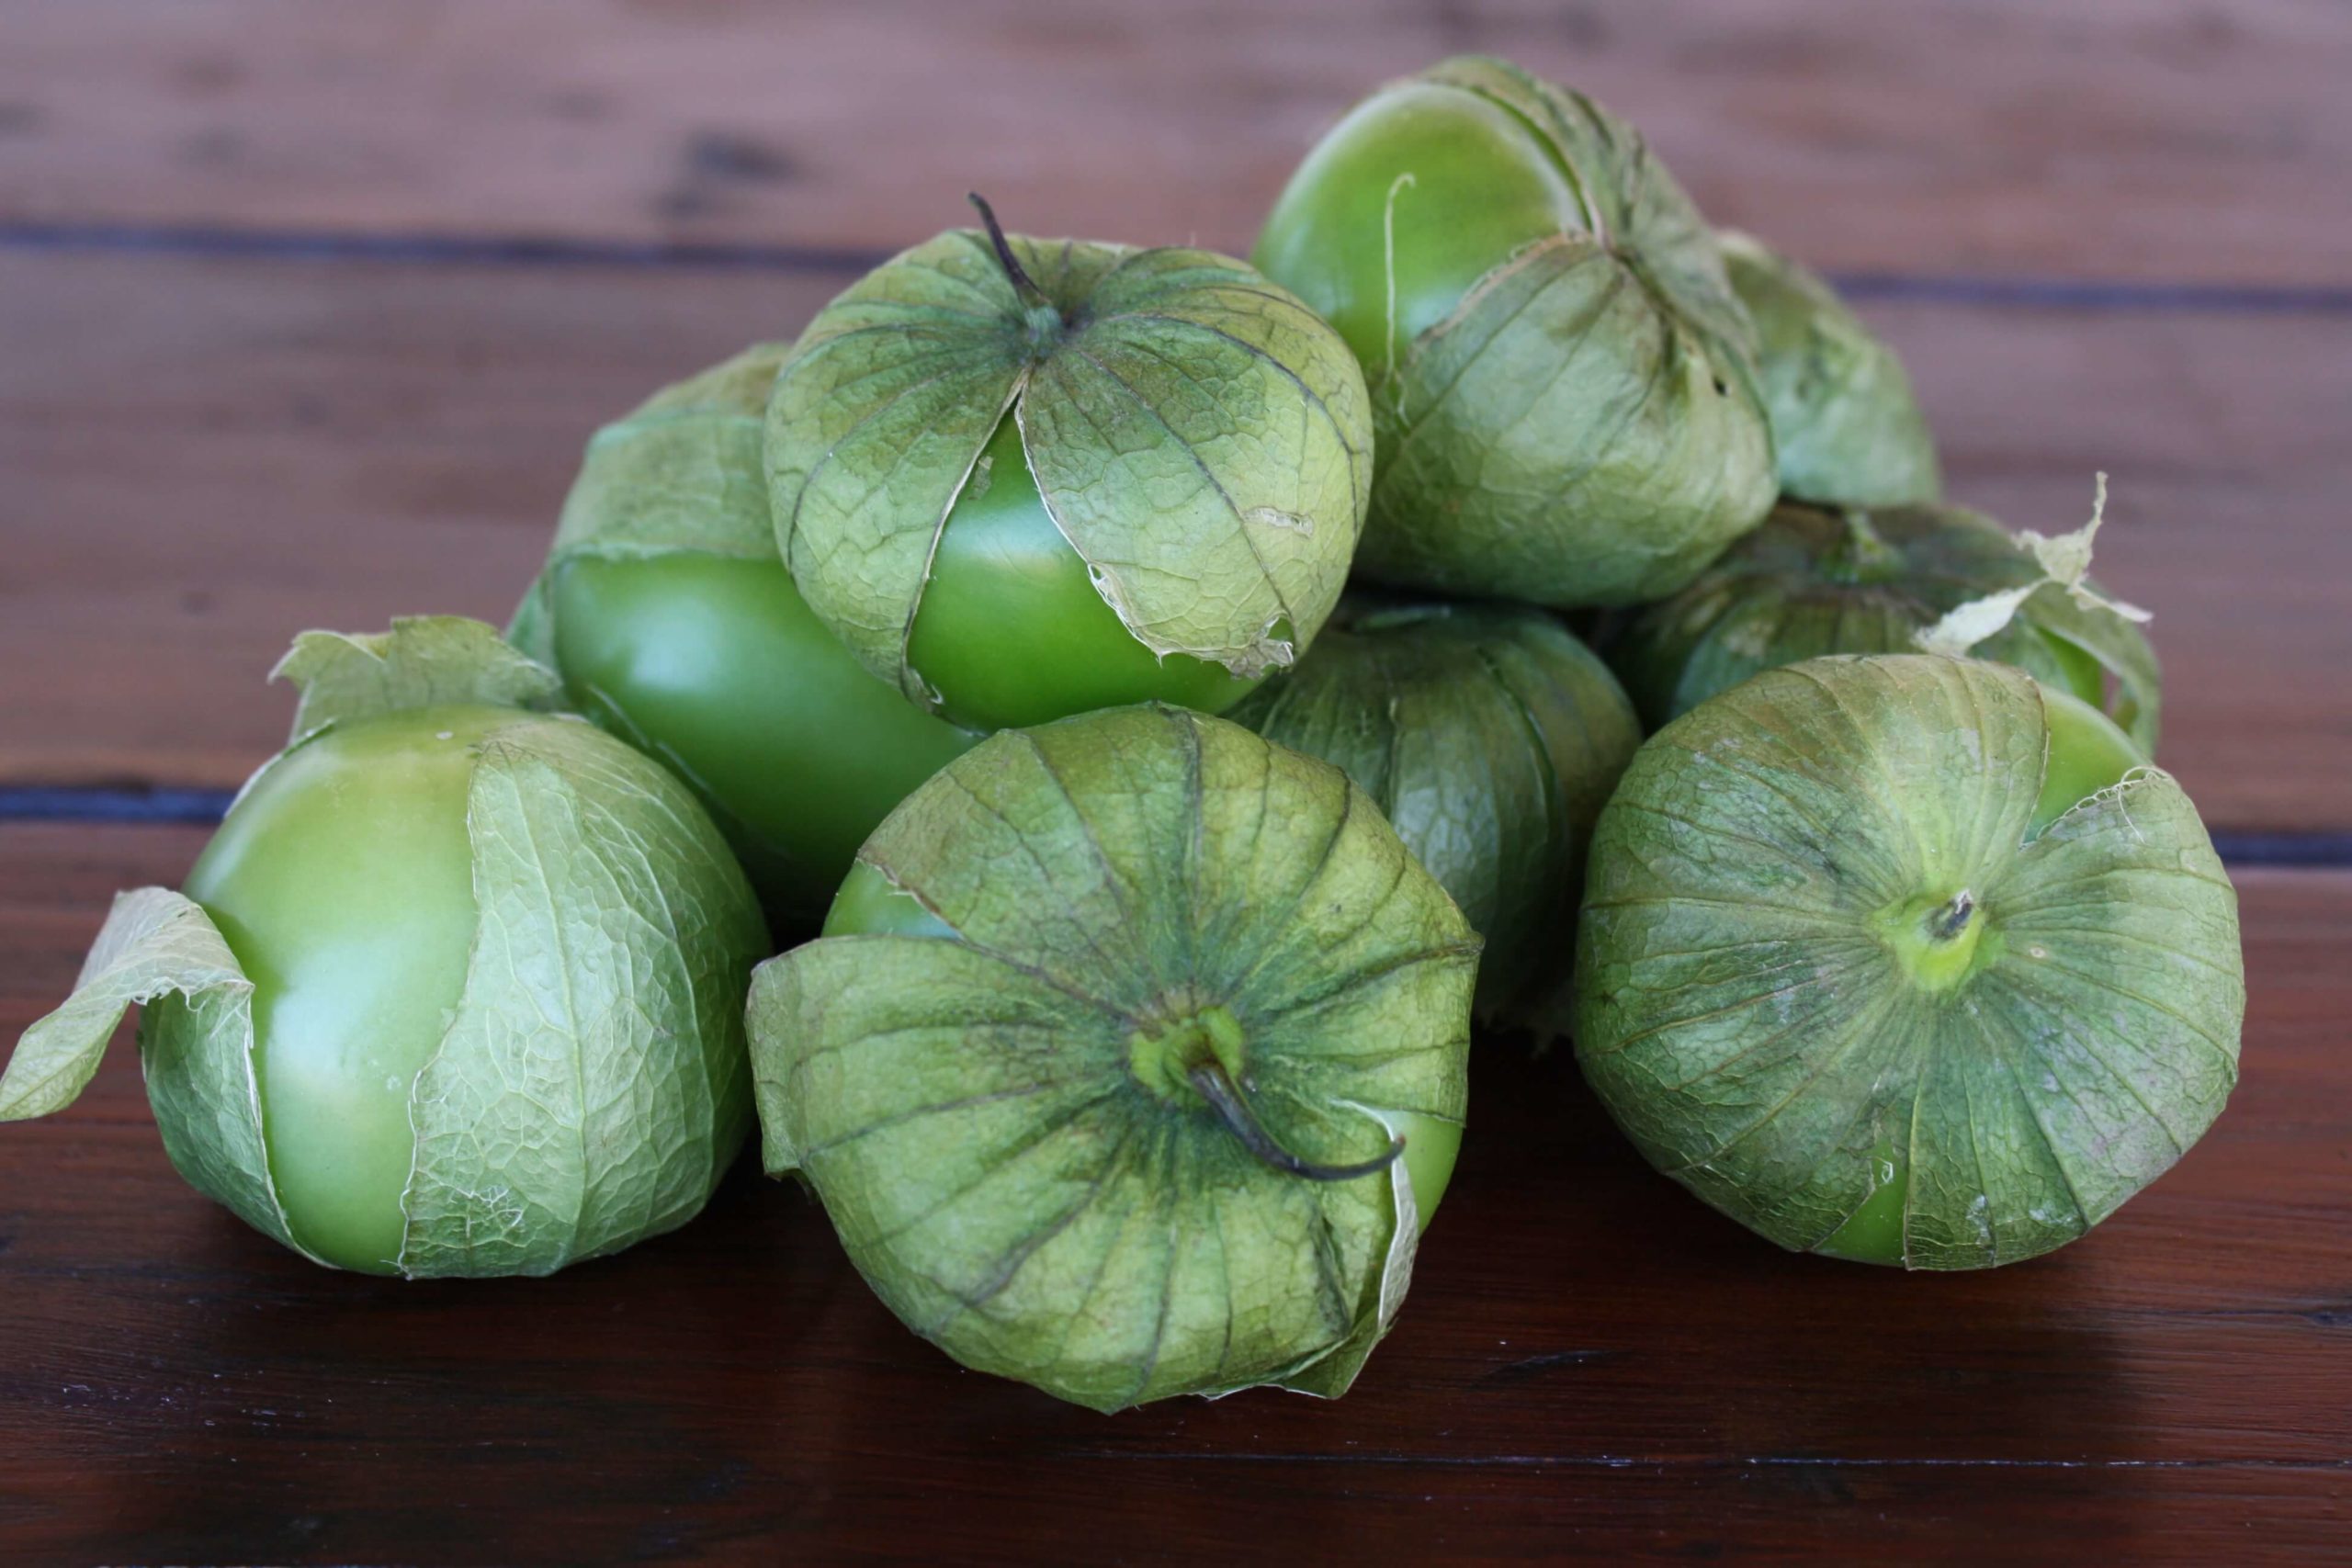 Are unripe tomatillos poisonous? - Foodly